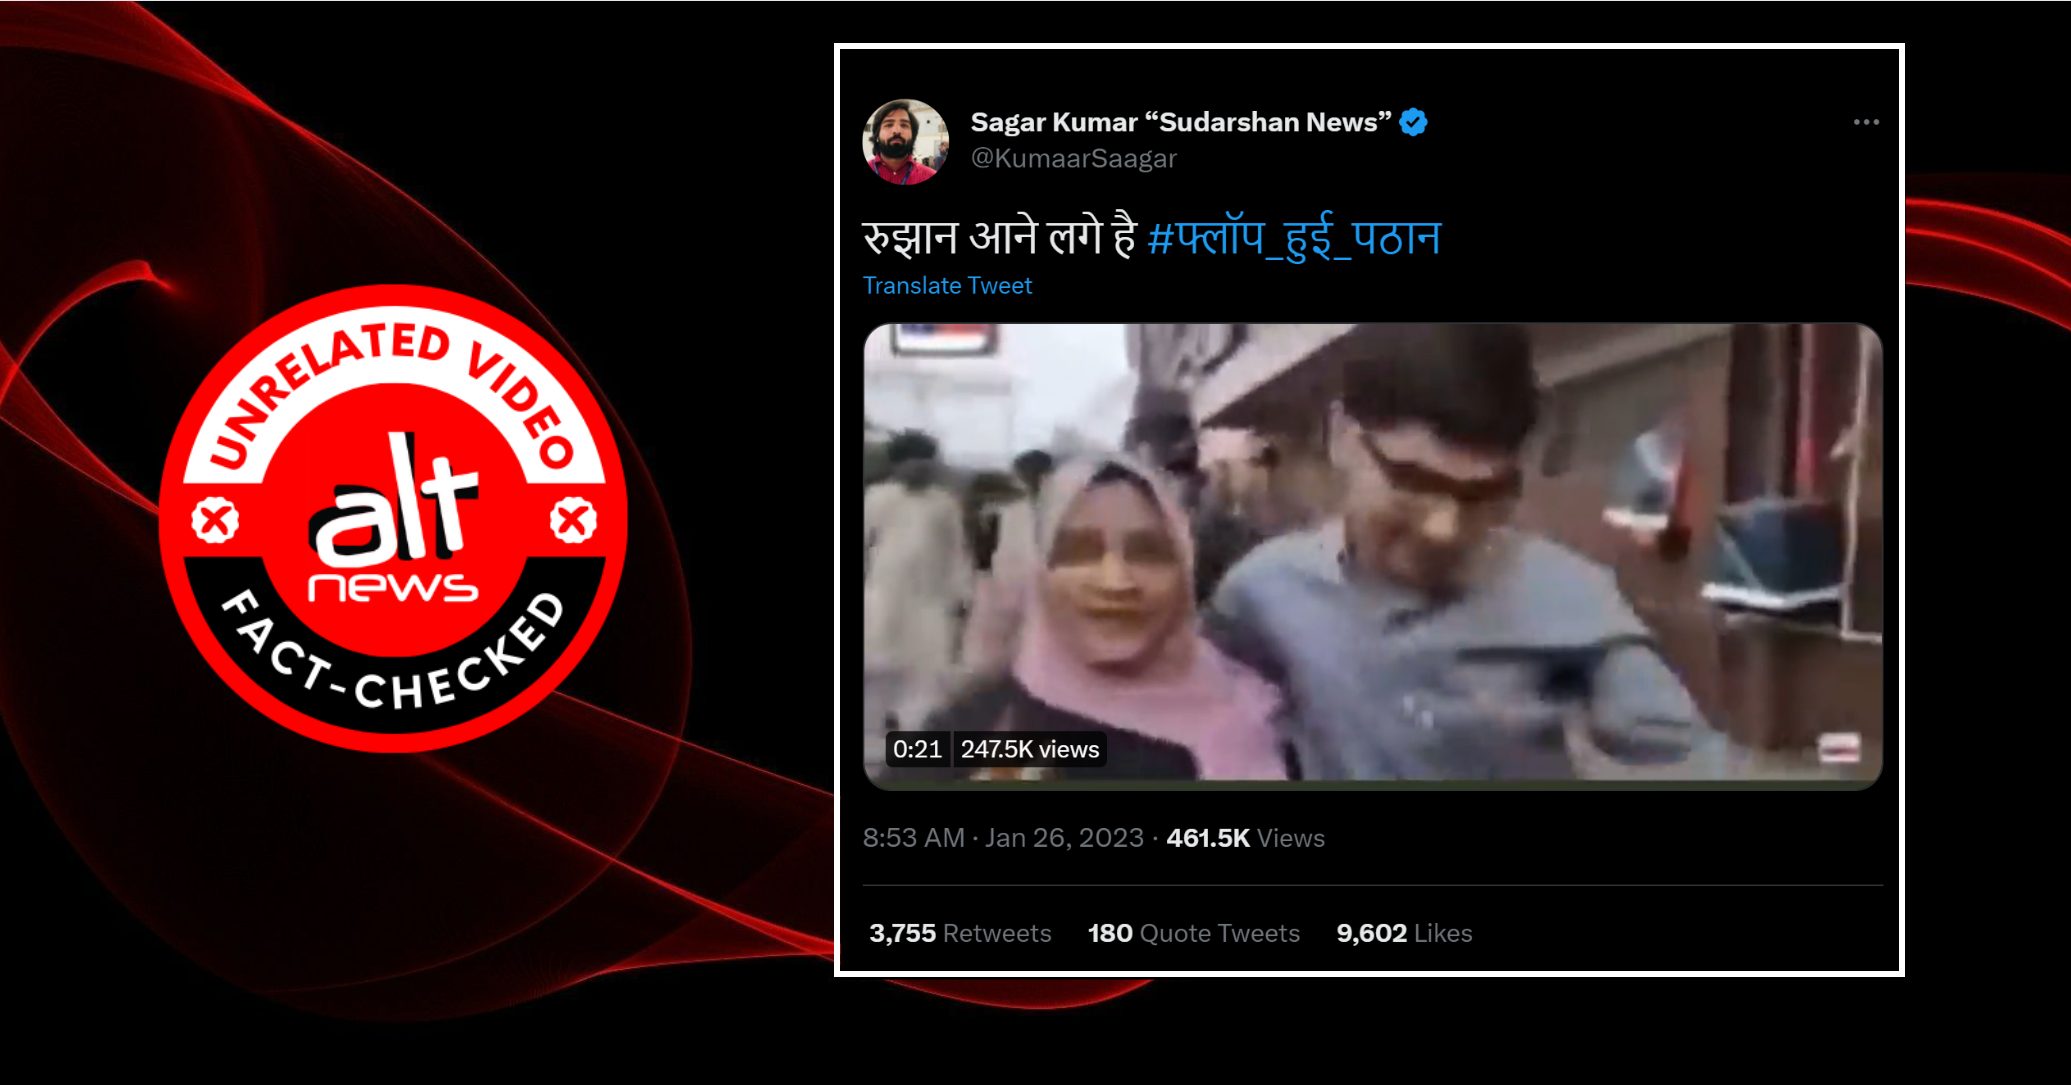 Unrelated, old videos viral as audience reaction to Shah Rukh Khan's 'Pathaan' - Alt News